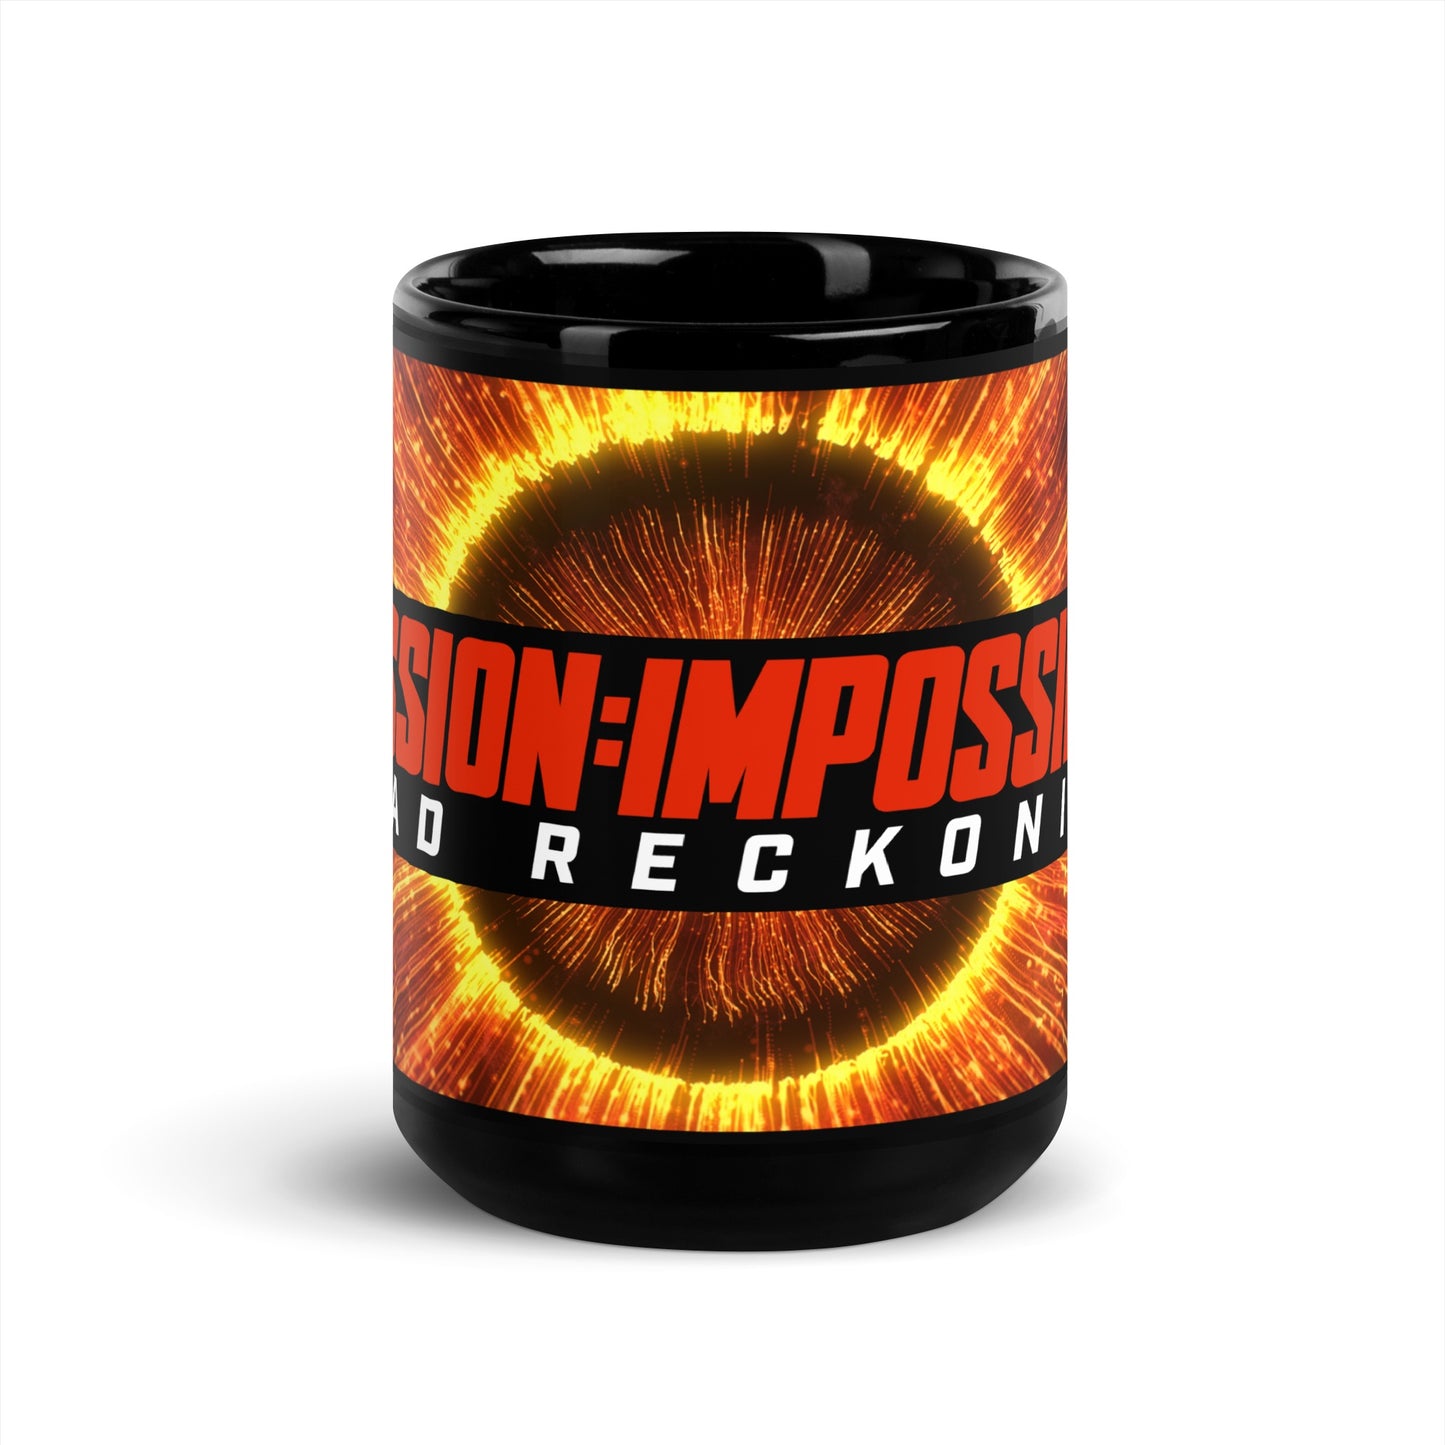 Mission: Impossible - Dead Reckoning Logo Taza negra